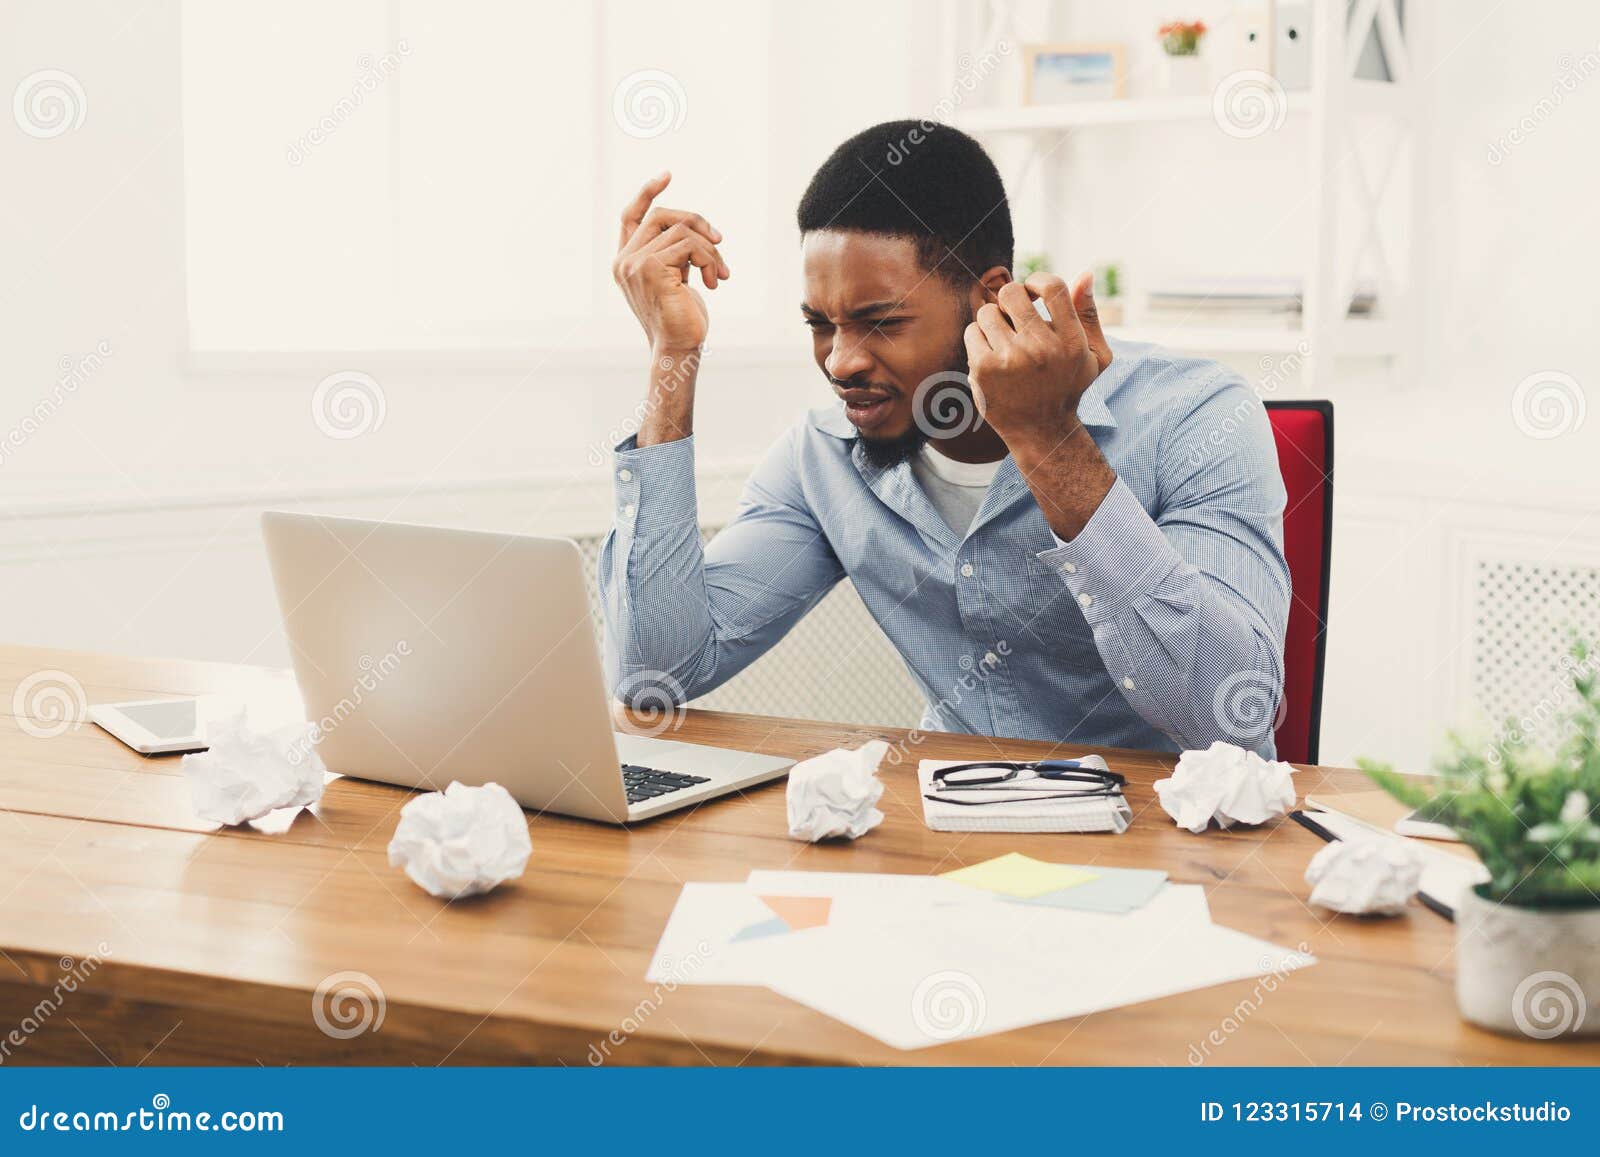 furious-african-american-employee-workplace-angry-black-employee-office-workplace-laptop-lots-crumpled-papers-123315714.jpg